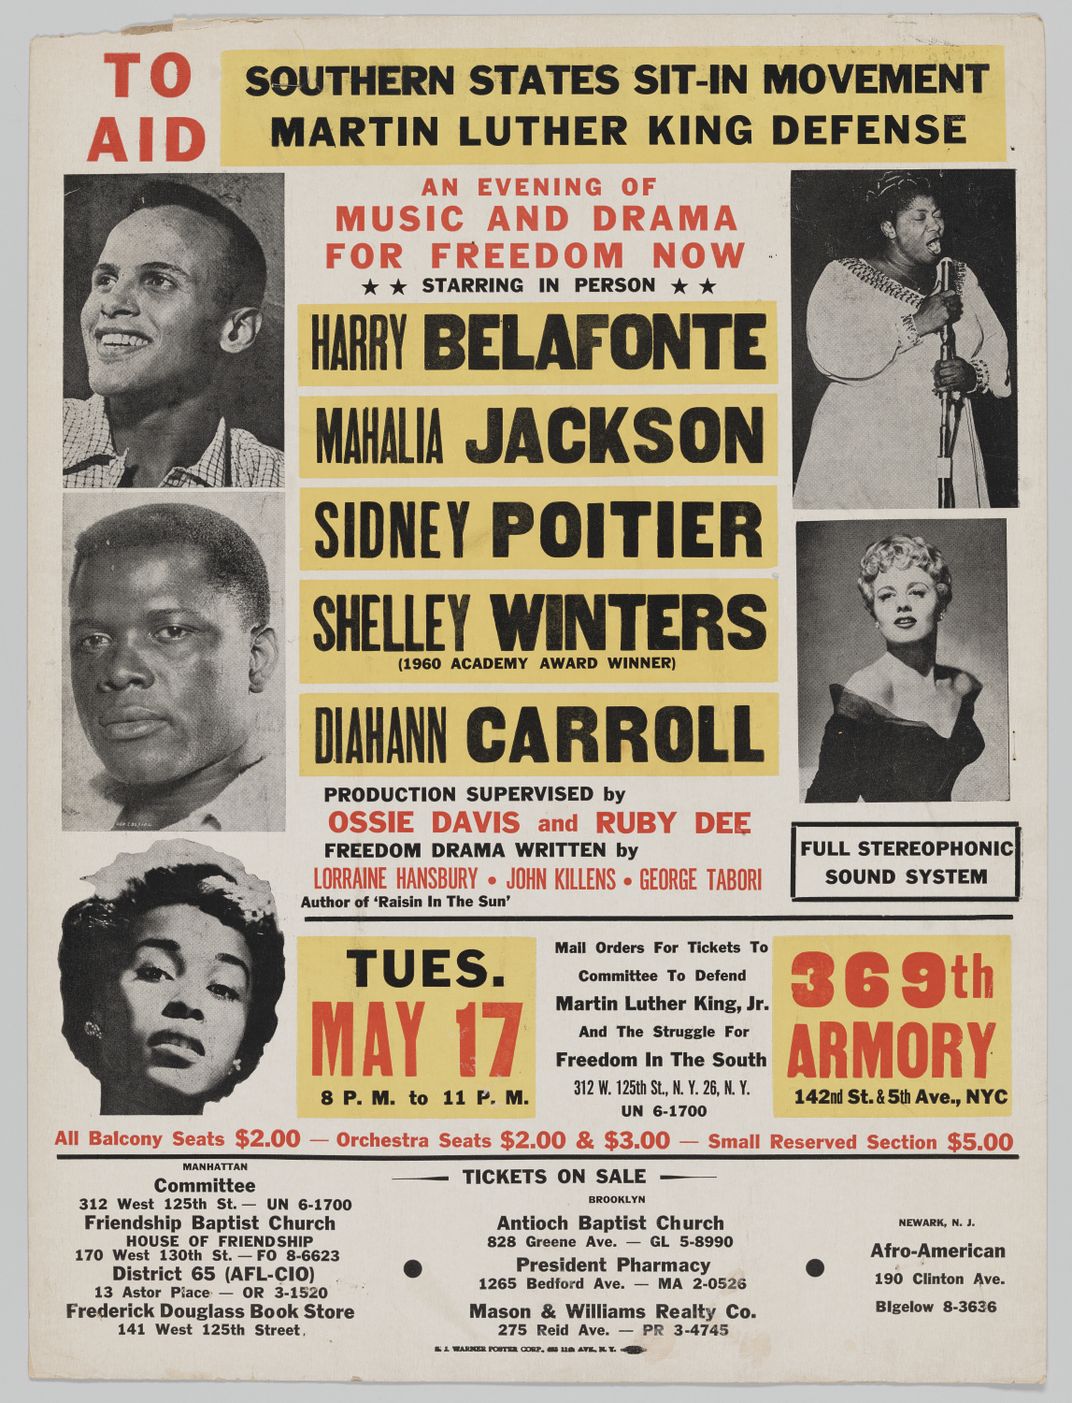 Poster for a concert to aid sit-in movements and the Martin Luther King Defense, featuring Harry Belafonte, Mahalia Jackson, Sidney Poitier, Shelley Winters and Diahann Carroll